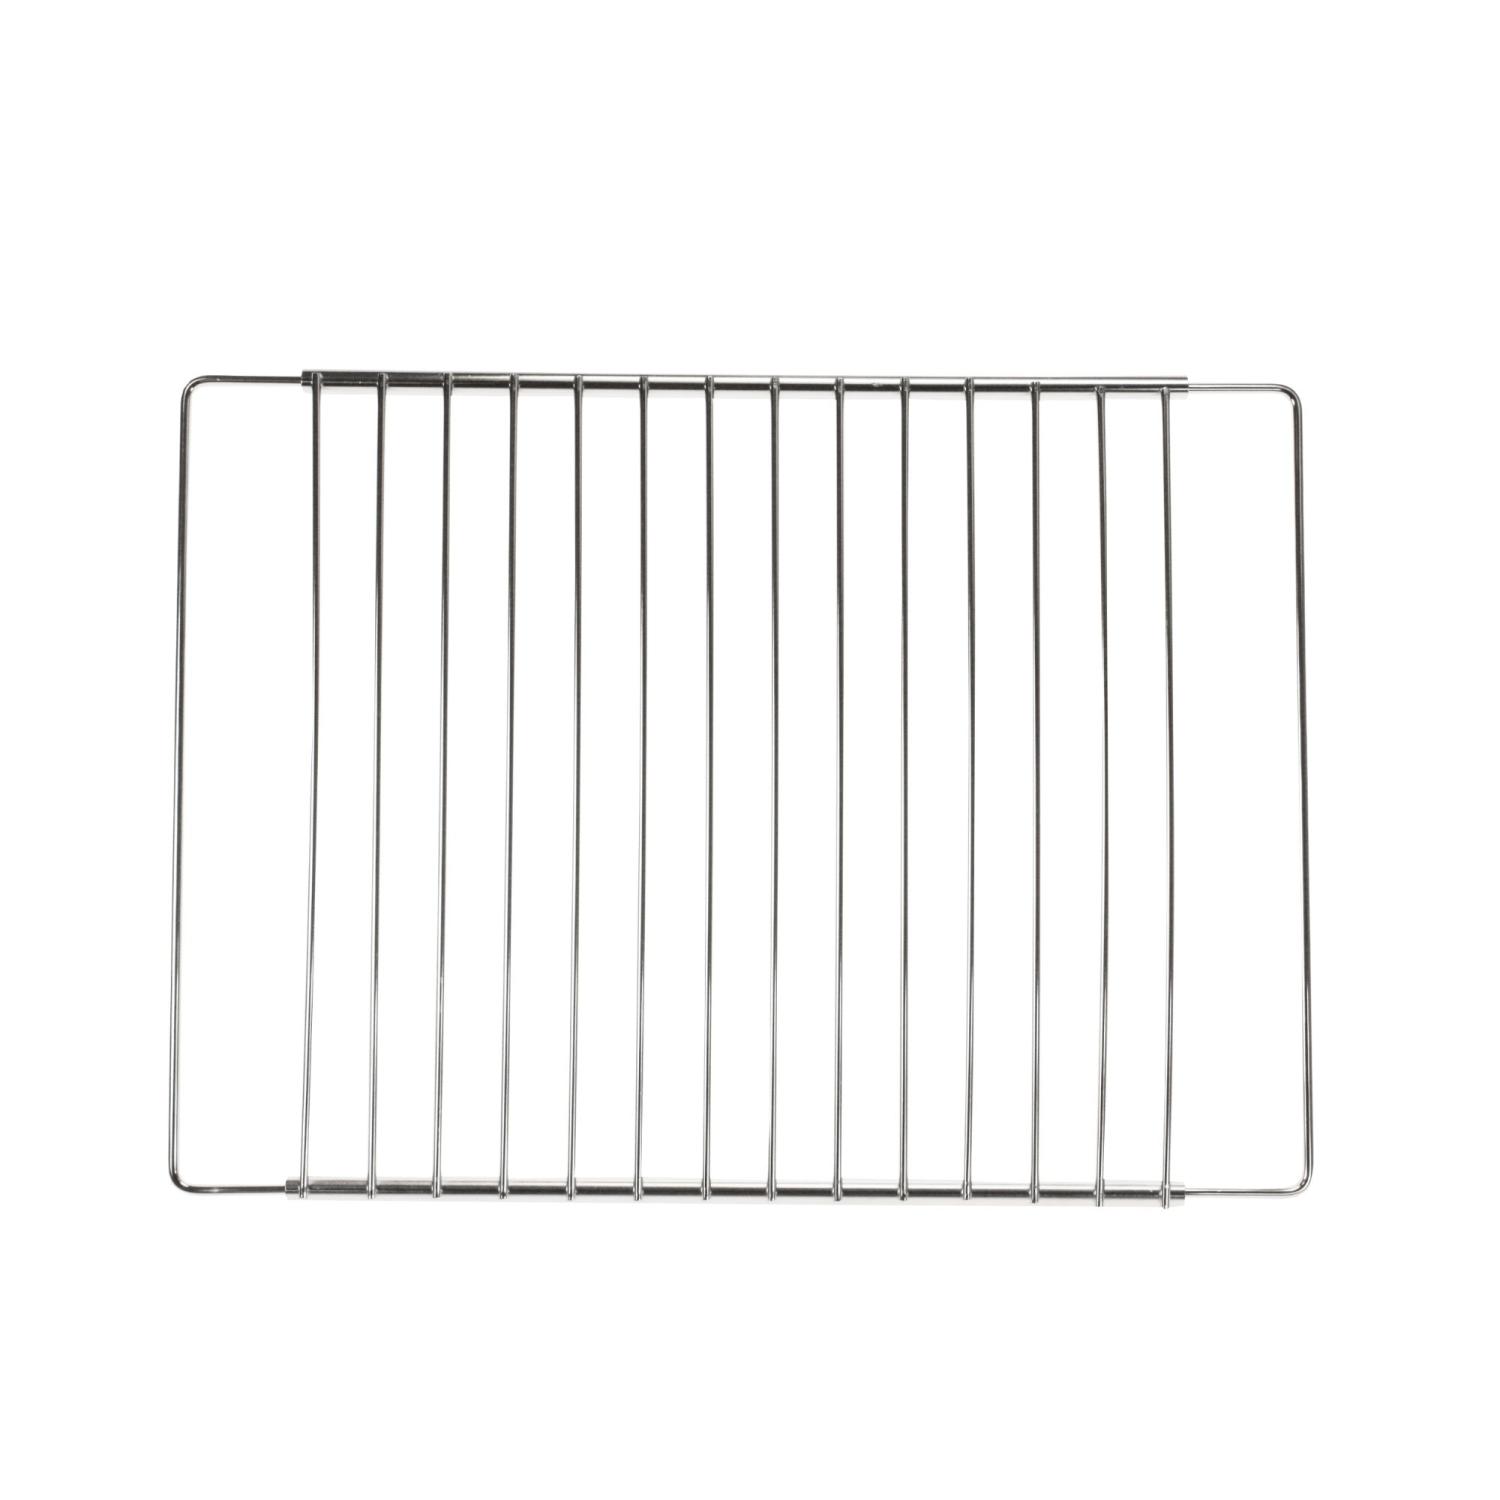 Universal Grill Rack, grill rack, bbq grill, barbecue grill, bbq grill rack, barbecue grill rack, supplier, dropshipping, wholesale